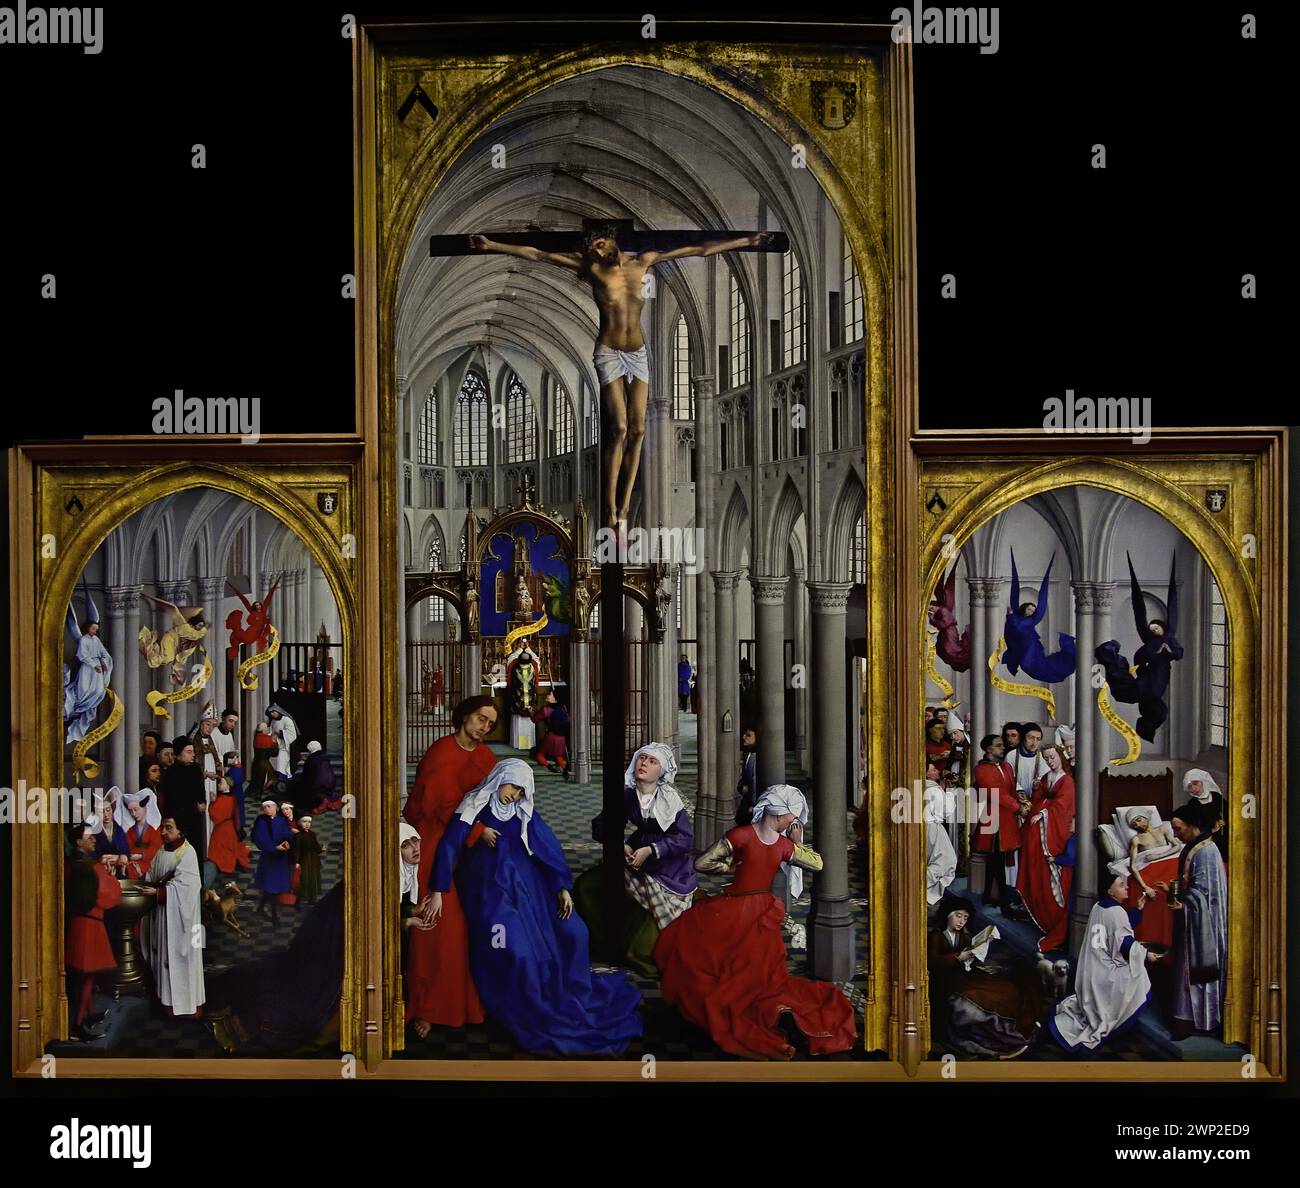 The Seven Sacraments ( Baptism, Confirmation and Confession - Christ on the Cross and the Eucharist - The Ordinatio, Marriage and Extreme Unction ) 1440-1445  by Rogier van der Weyden, Royal Museum of Fine Arts,  Antwerp, Belgium, Belgian. Stock Photo